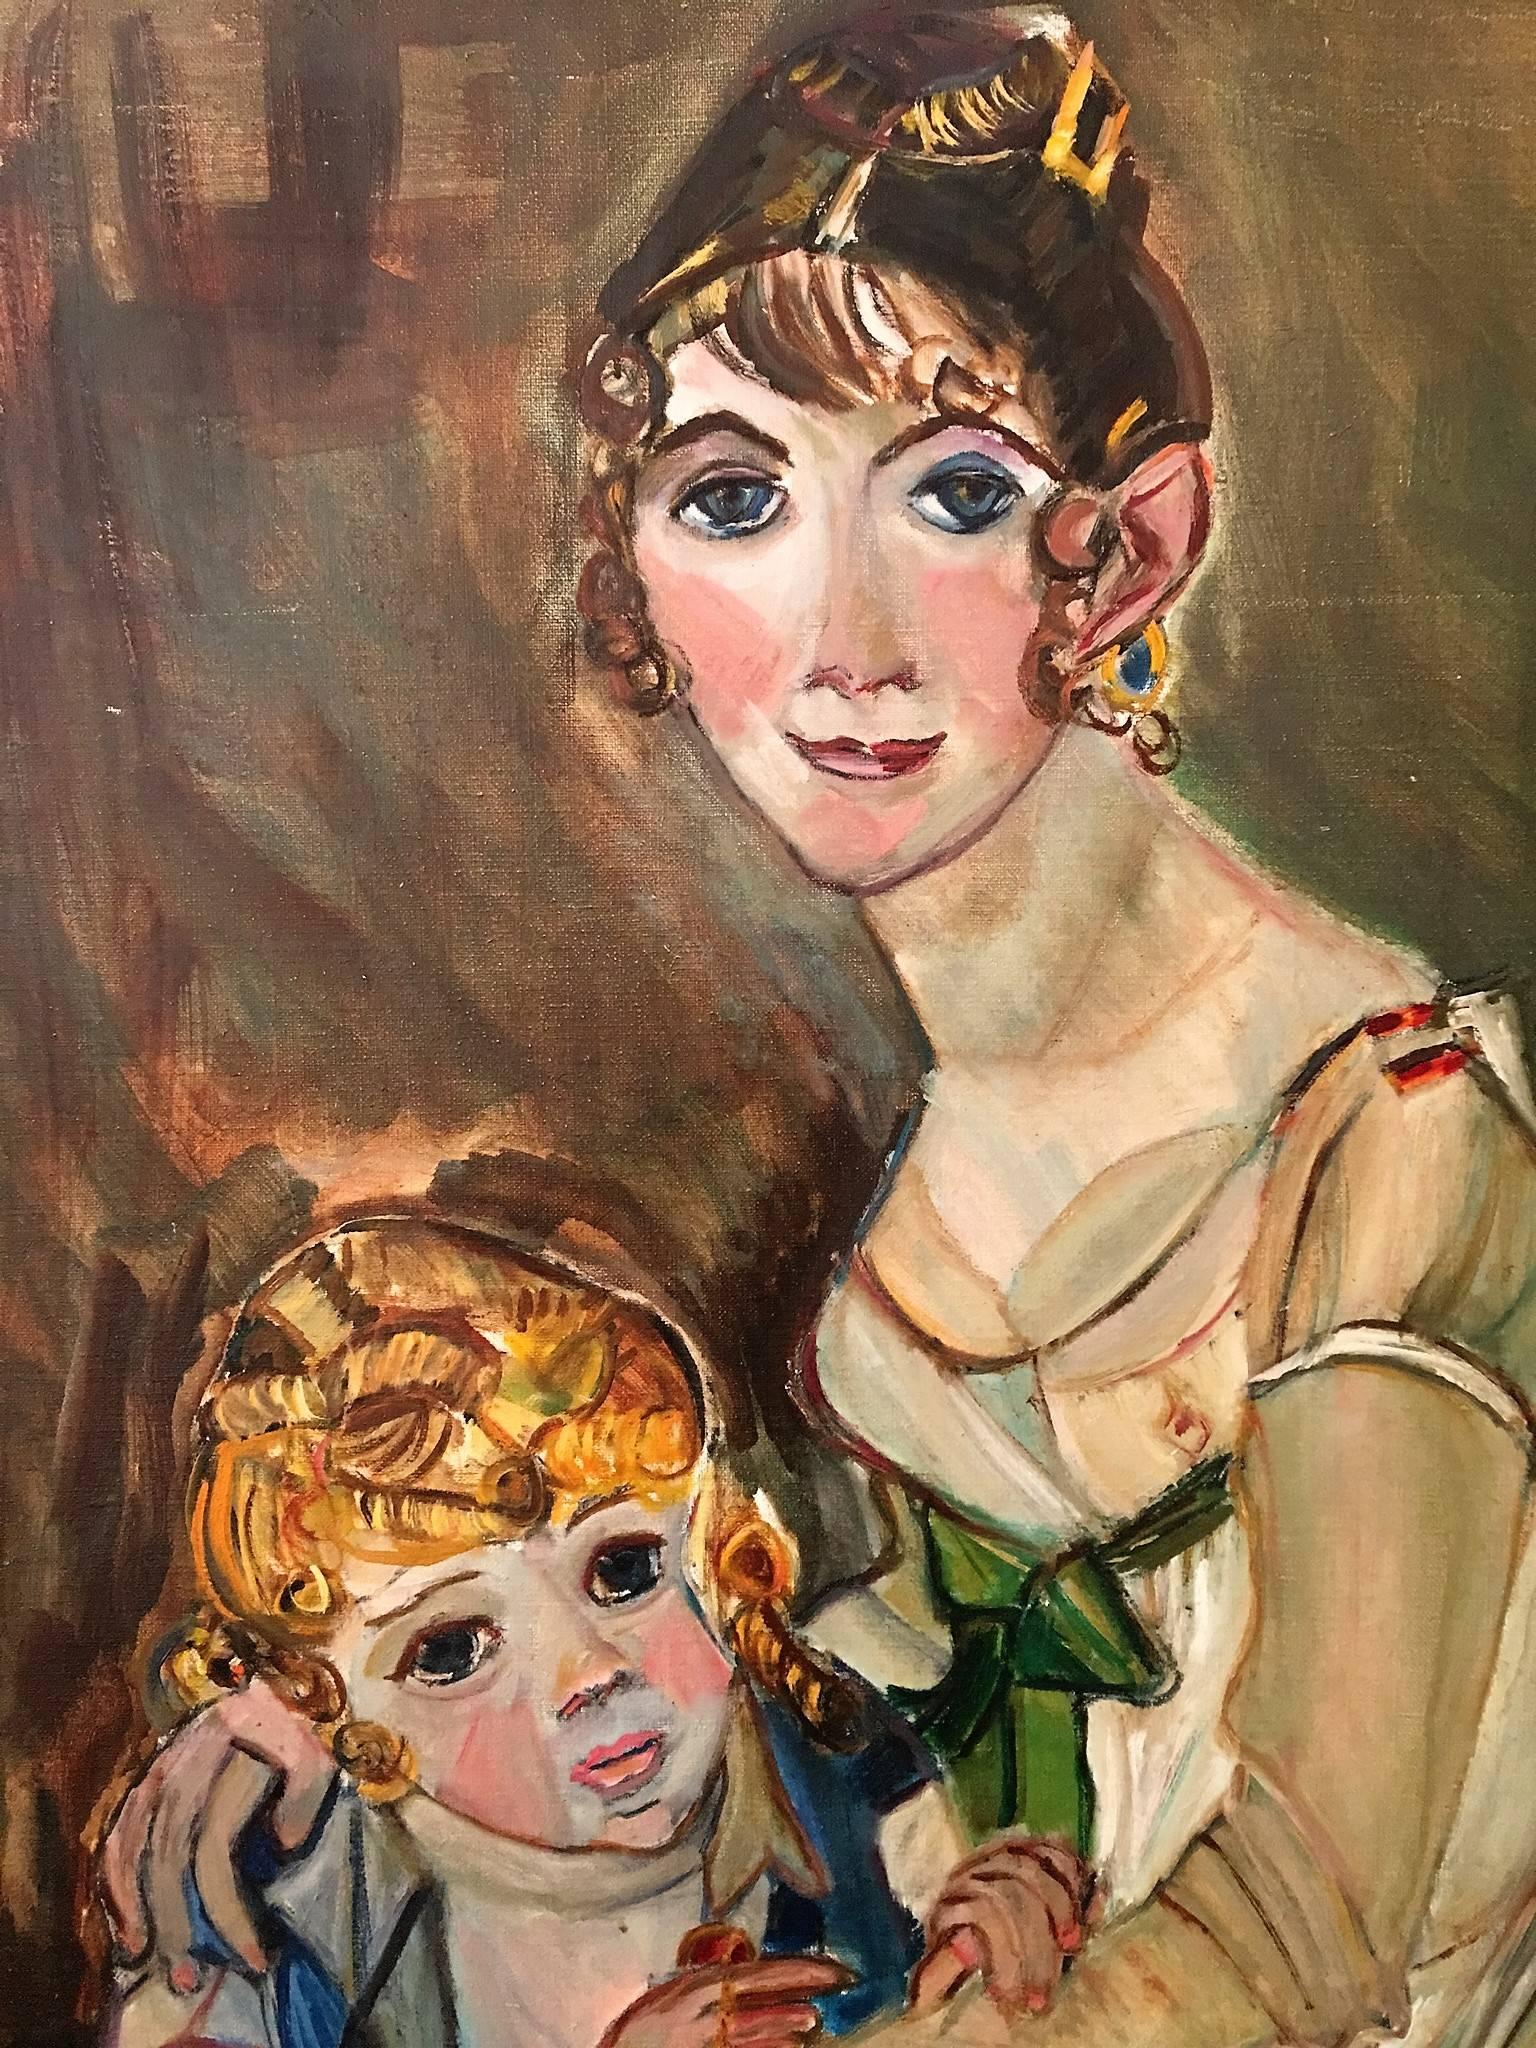 Interesting oil painting on canvas of a fancy dressed woman with a fancy hair style holding a fair haired child in her lap on a chair. Signed on Back Winona Diskin.